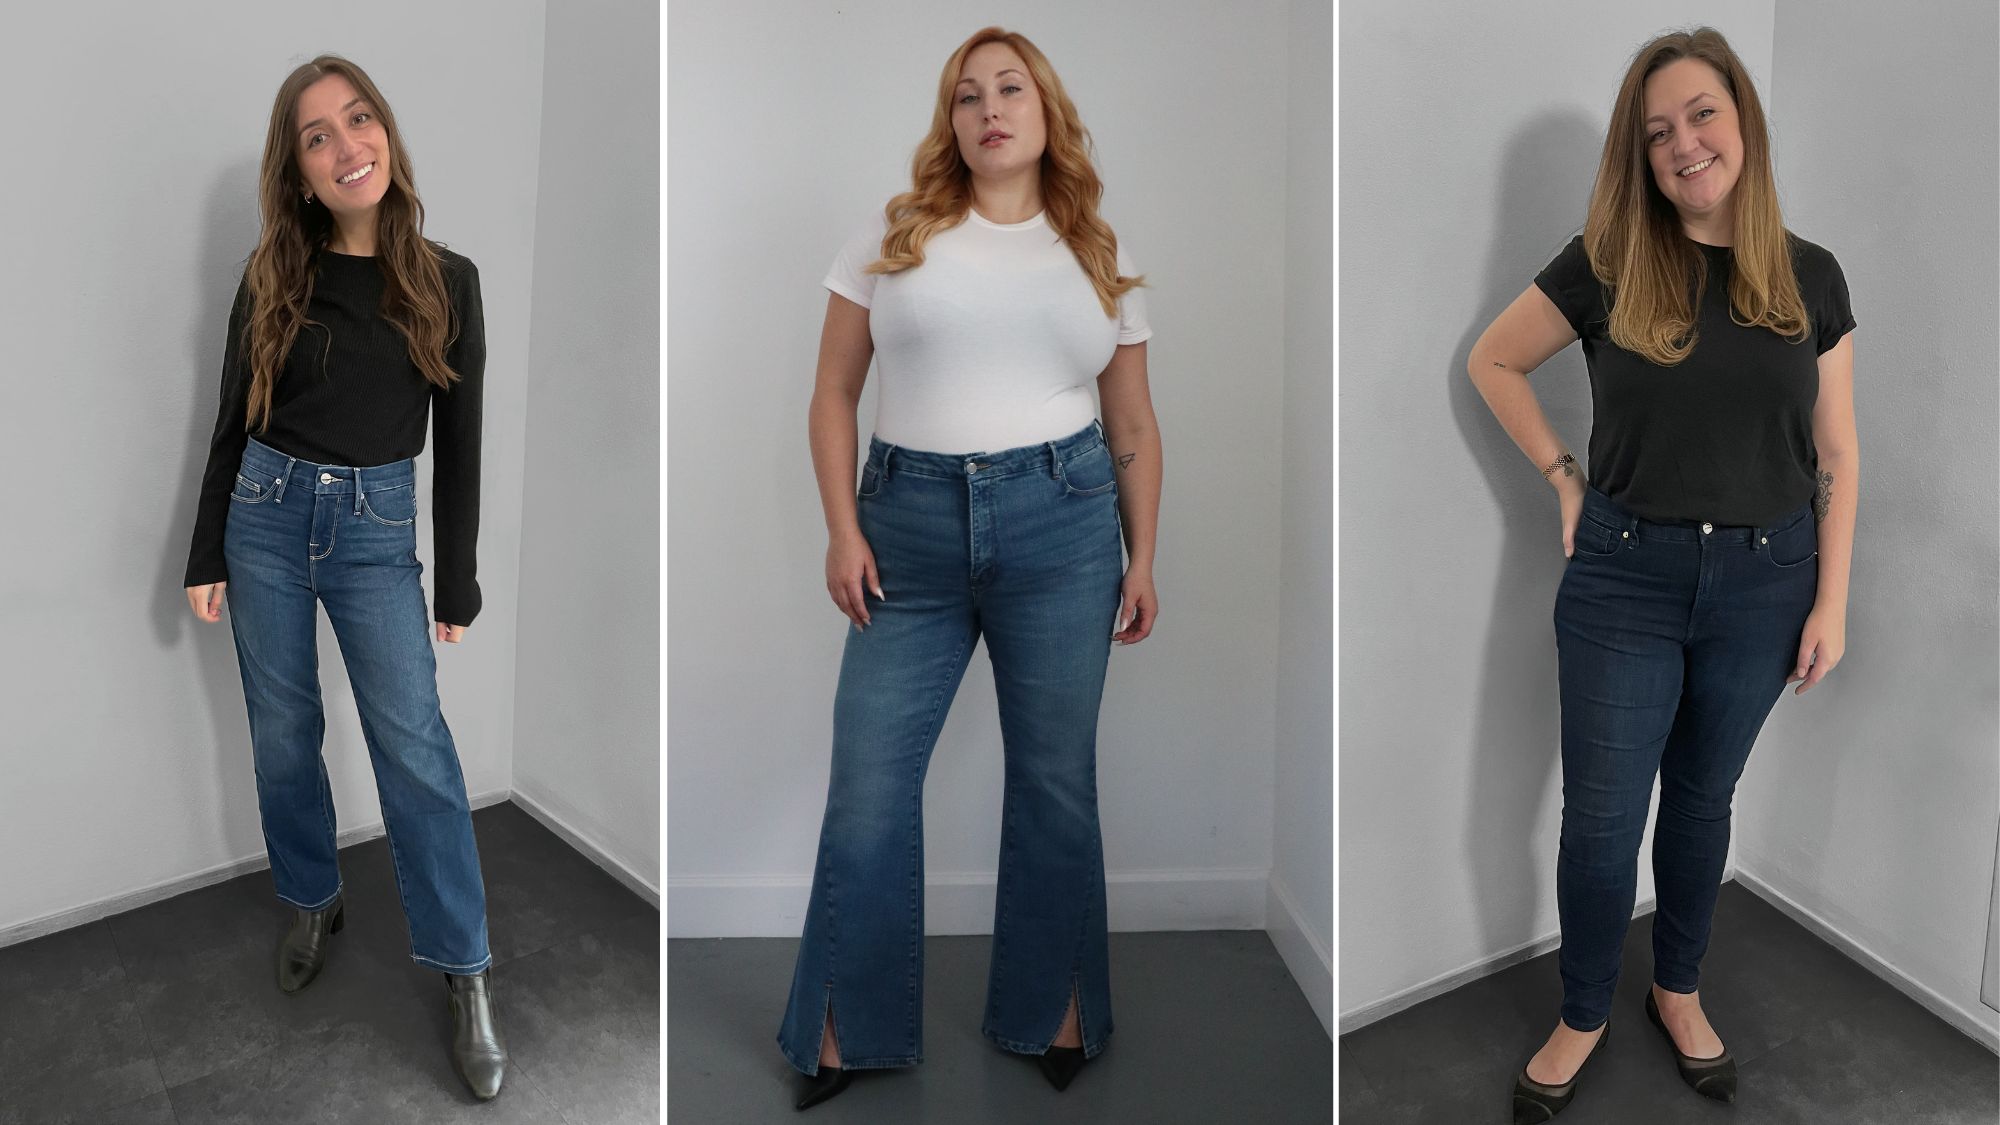 Top 5 Best Petite Denim Jeans Try On & Review - Reformation, Re